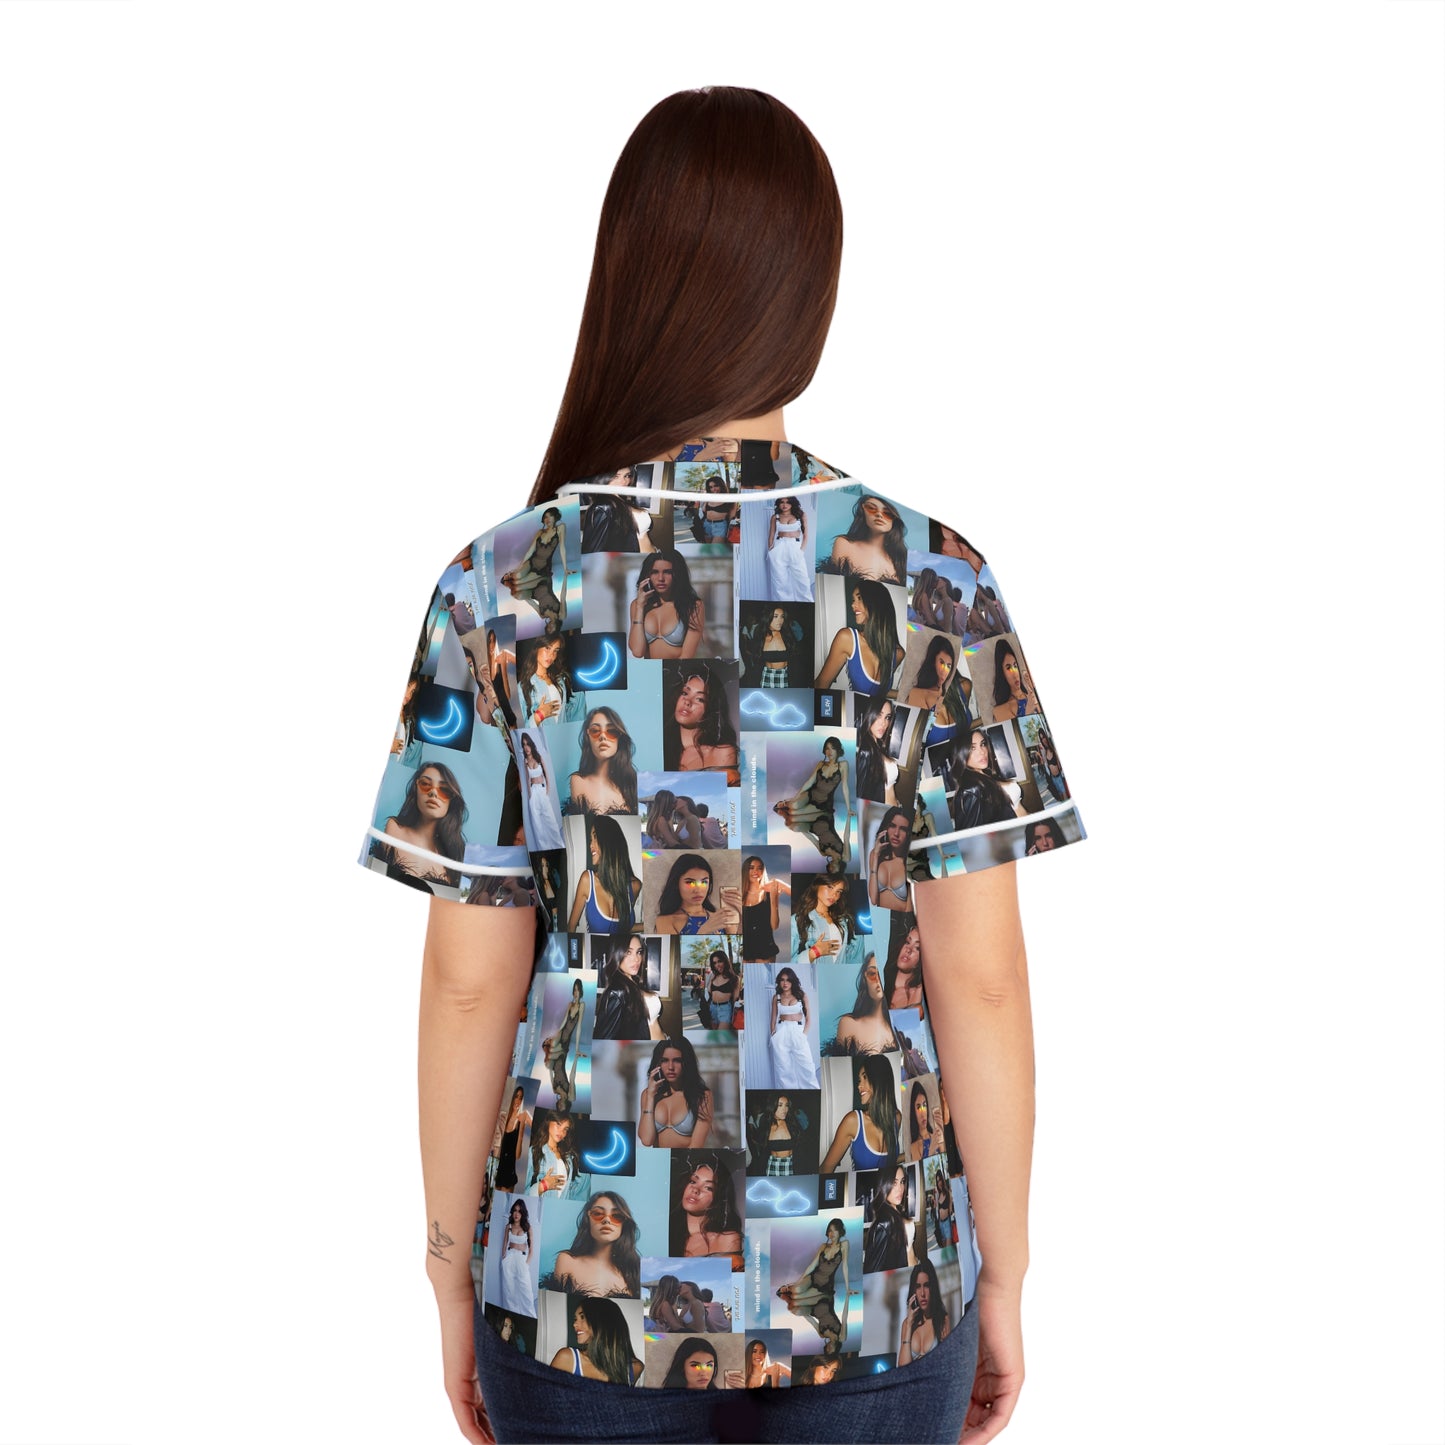 Madison Beer Mind In The Clouds Collage Women's Baseball Jersey